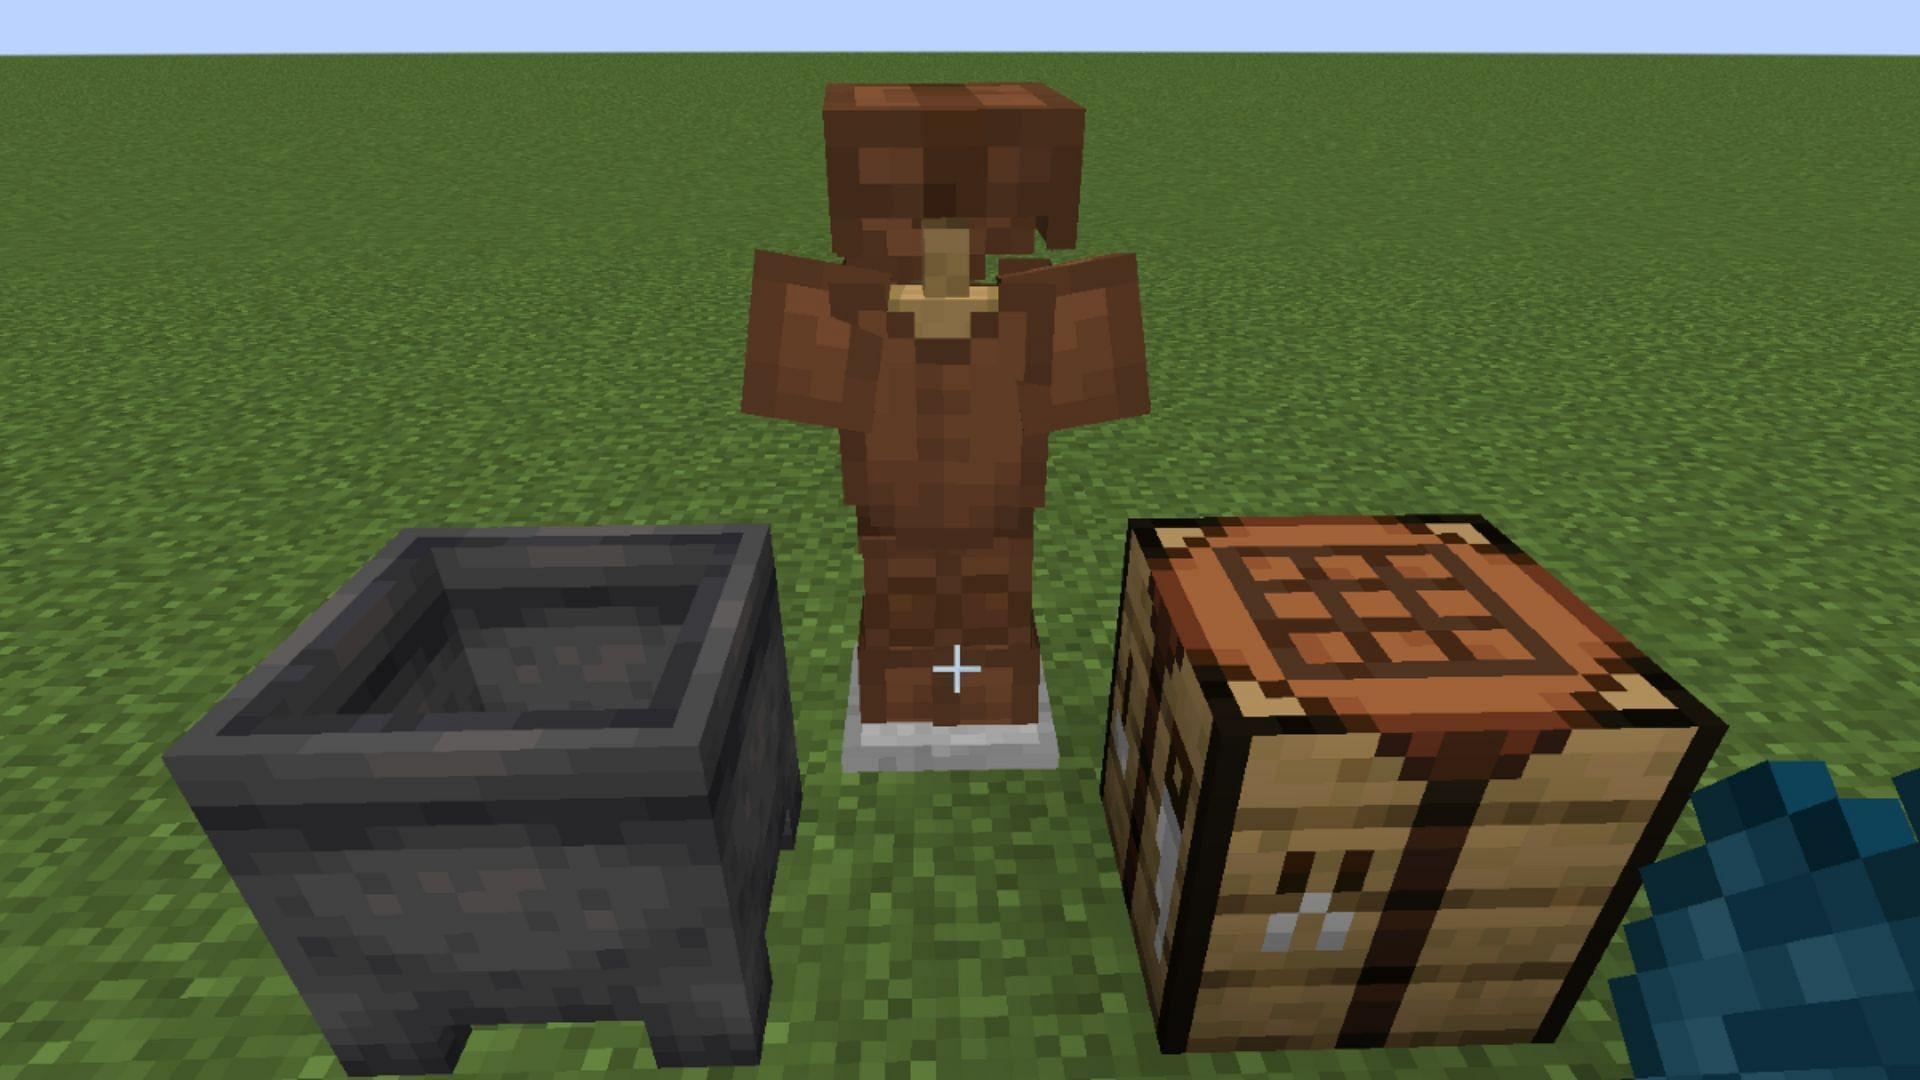 Leather Tunics are extremely easy to craft and are useless compared to other armors in Minecraft 1.19 (Image via Mojang)